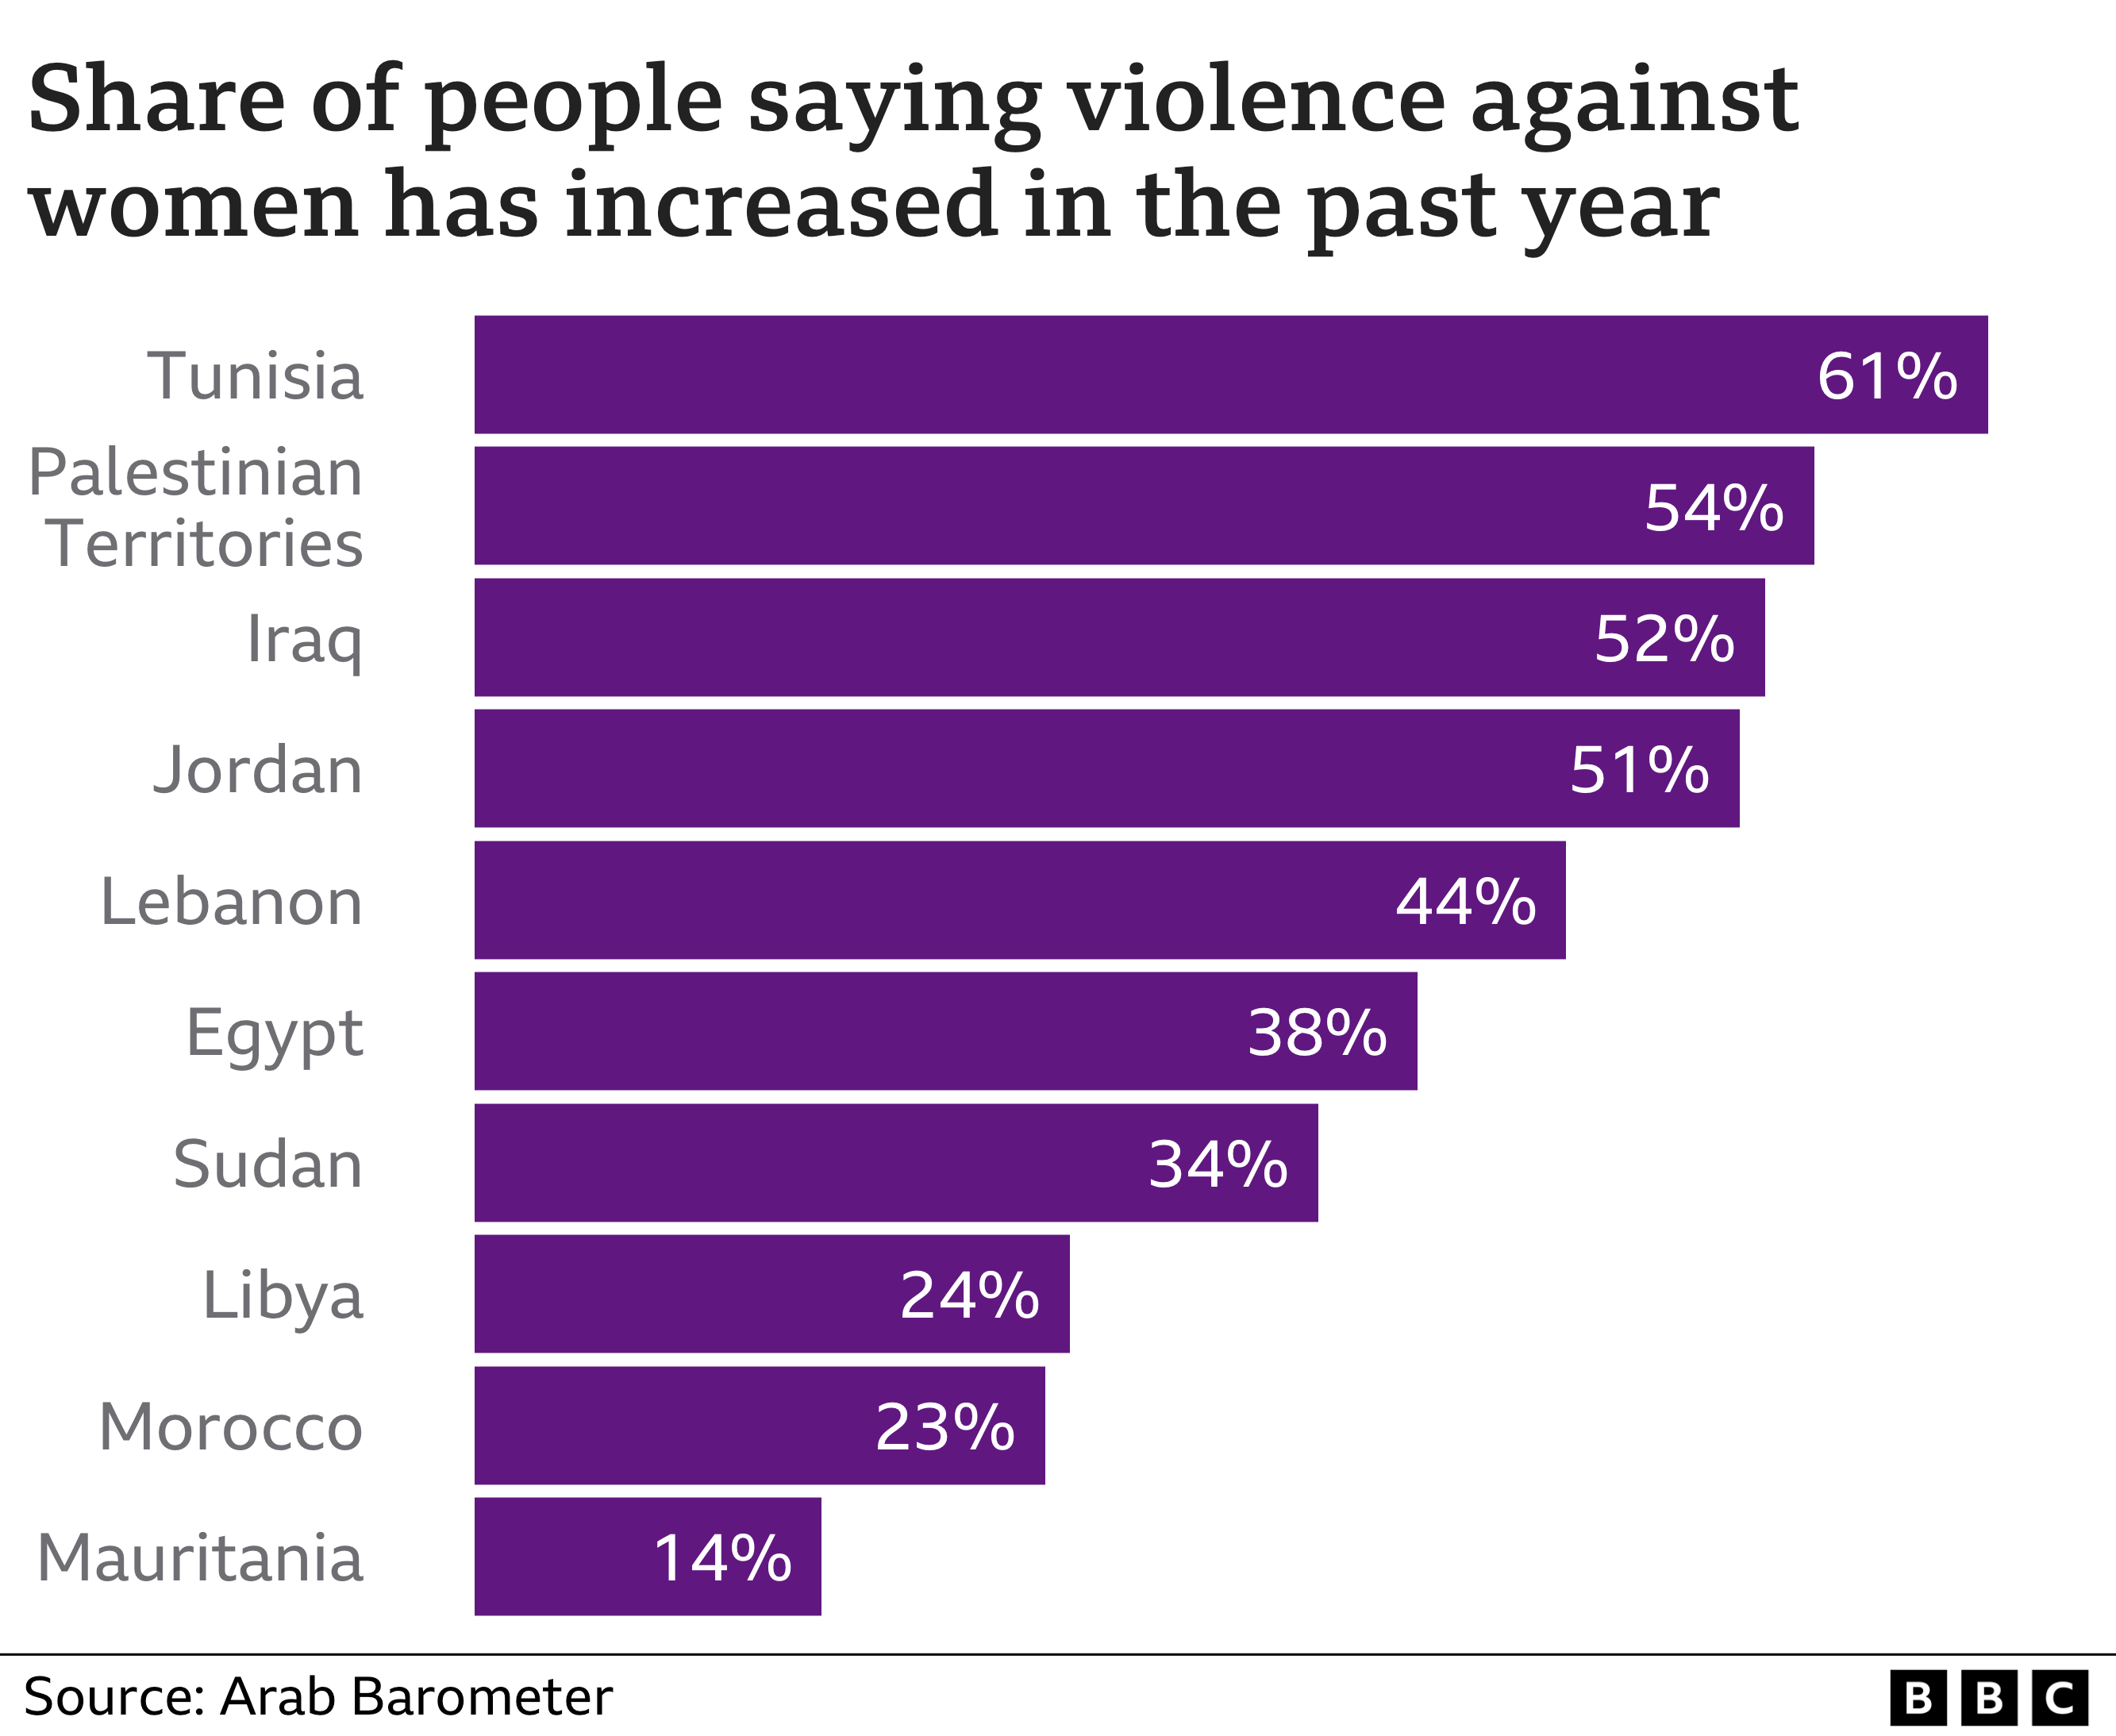 Chart showing the proportion of people who agree that violence against women has increased over the past year. Tunisia is the highest at 61%, followed by the Palestinian territories at 54%. At the bottom of the list is Mauritania, where only 14% of respondents say that violence against women has increased.